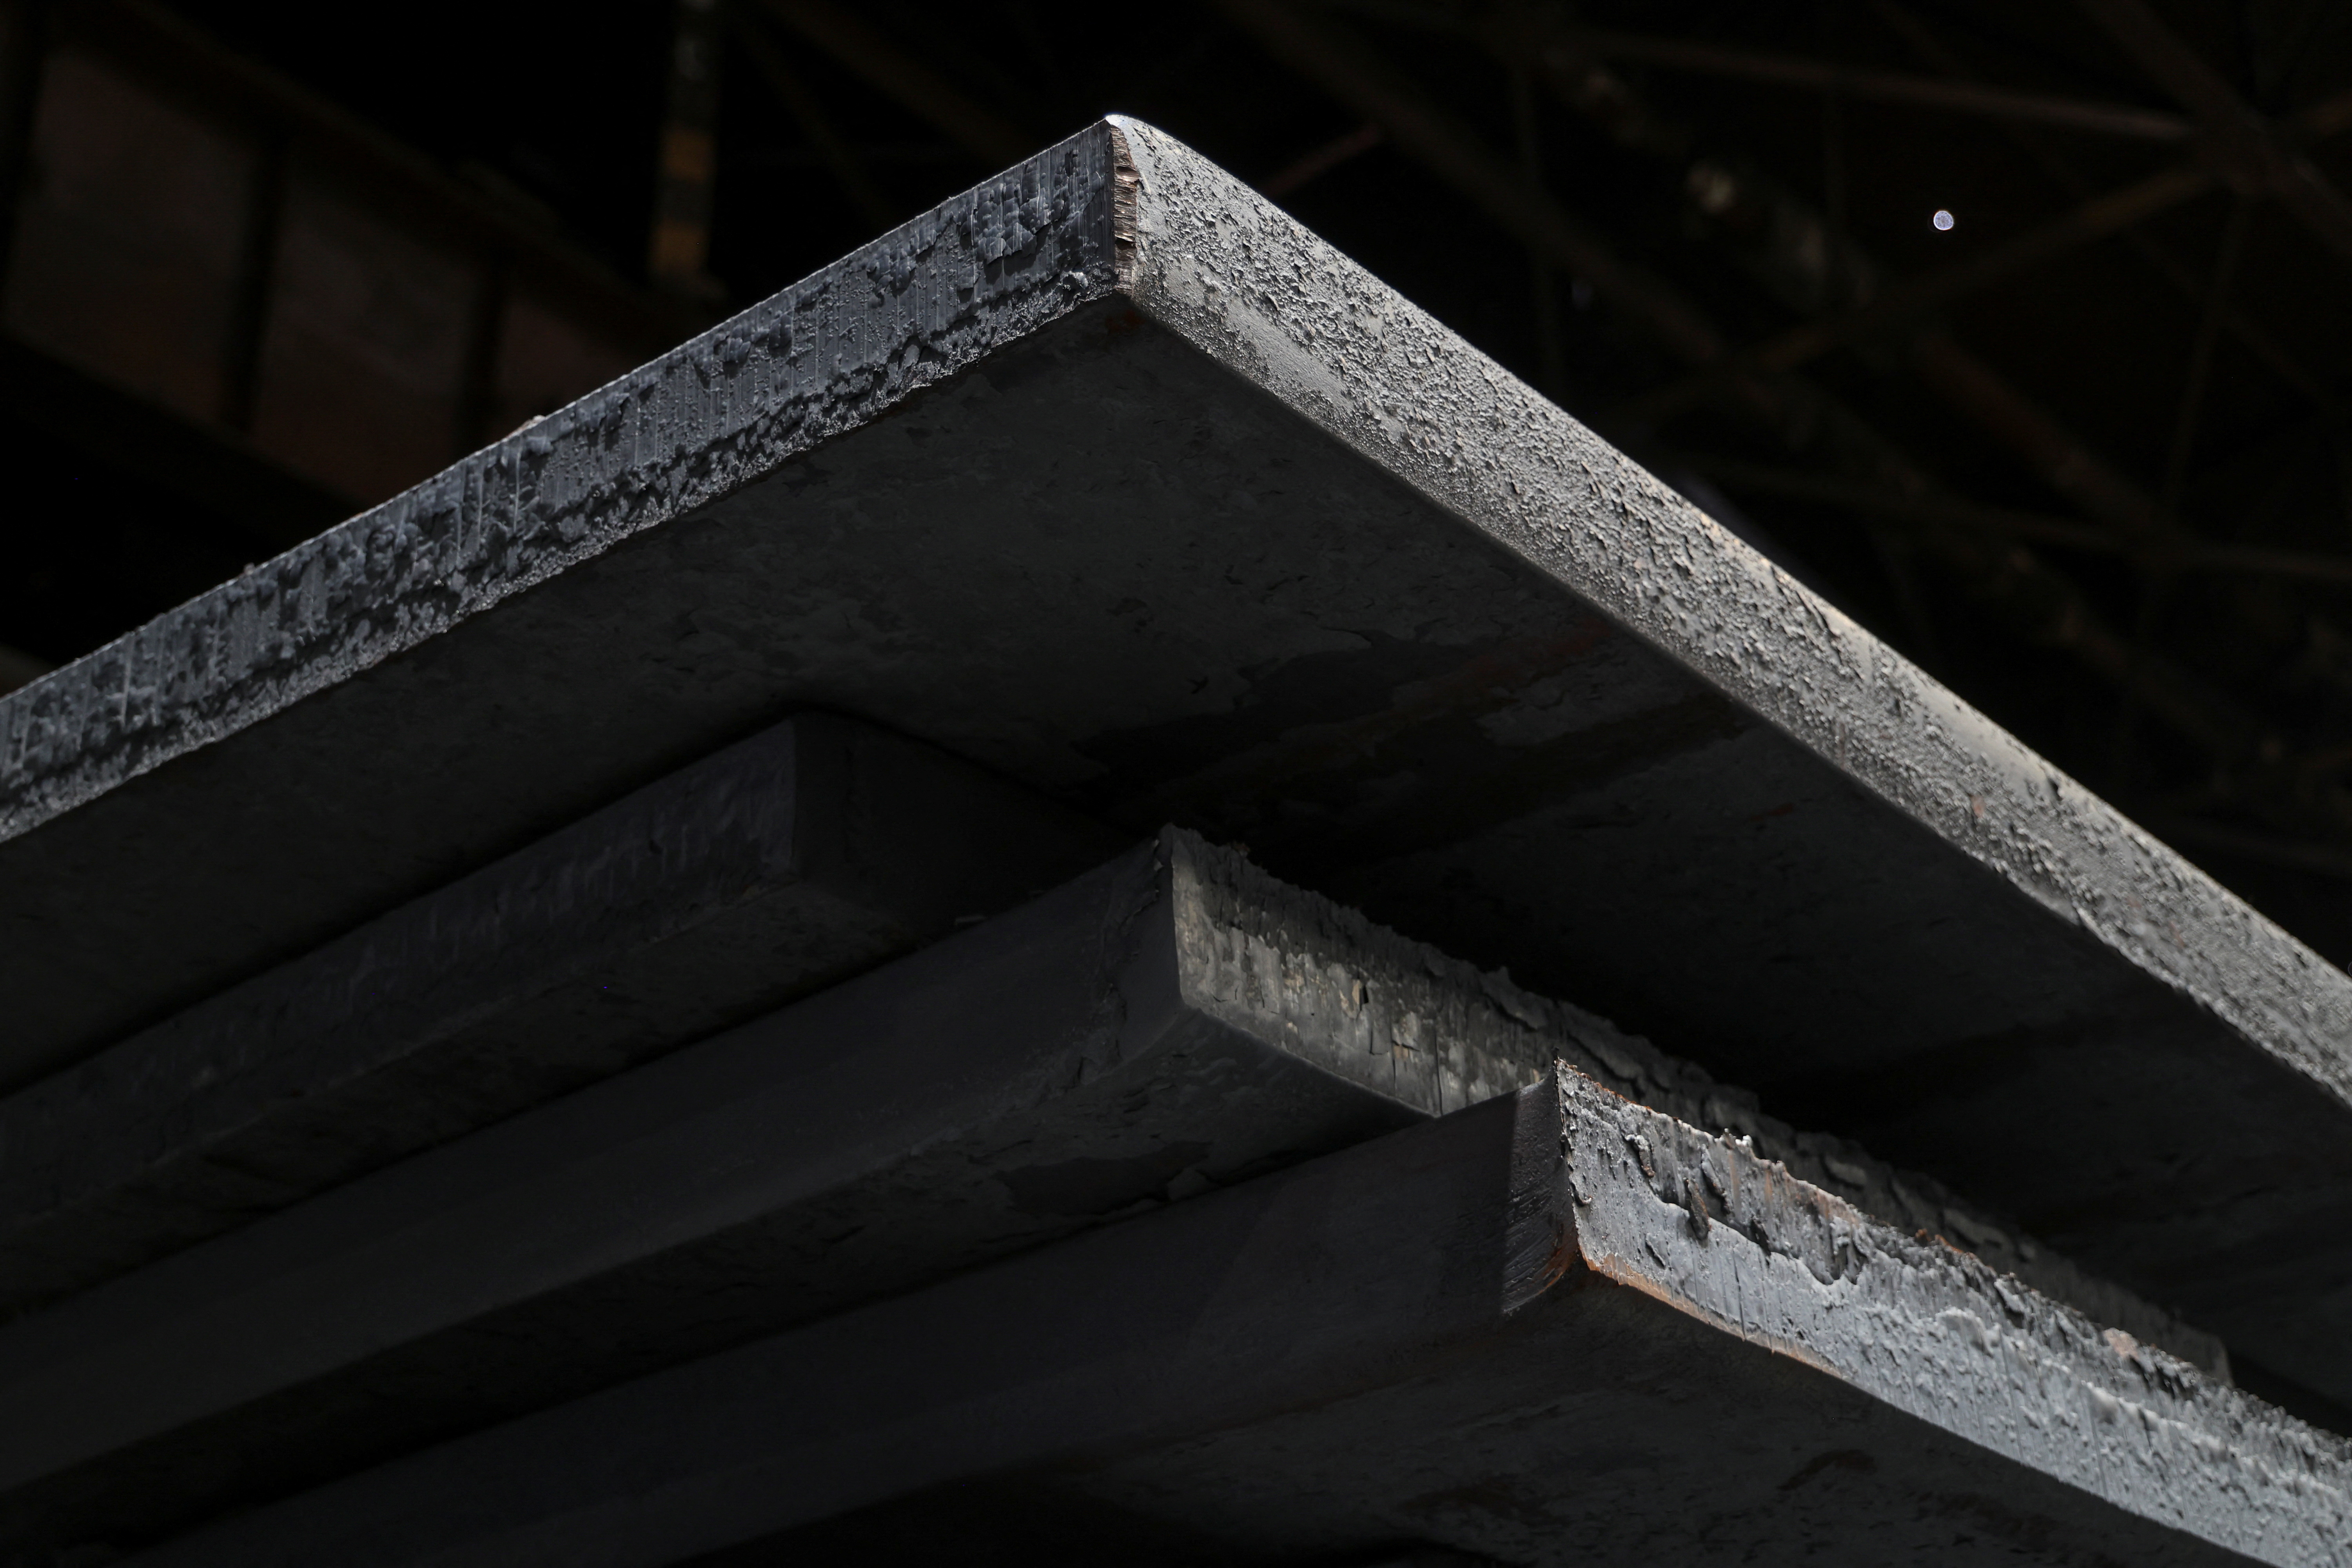 Plates of steel are seen at a production facility of Zaporizhstal Iron and Steel Works in Zaporizhzhia